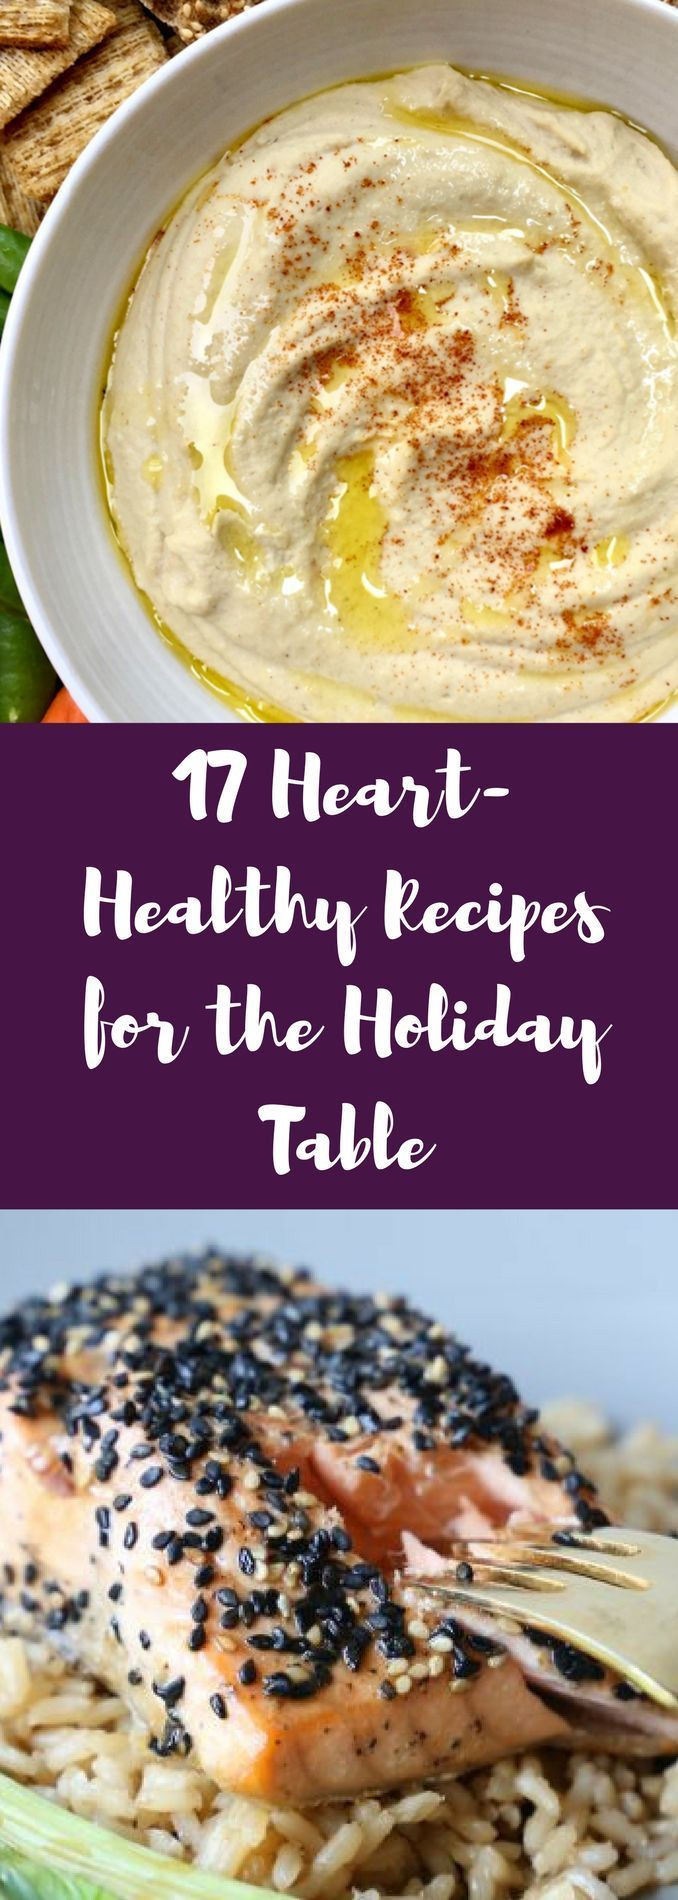 Heart Healthy Appetizers
 17 Heart Healthy Recipes for the Holiday Table